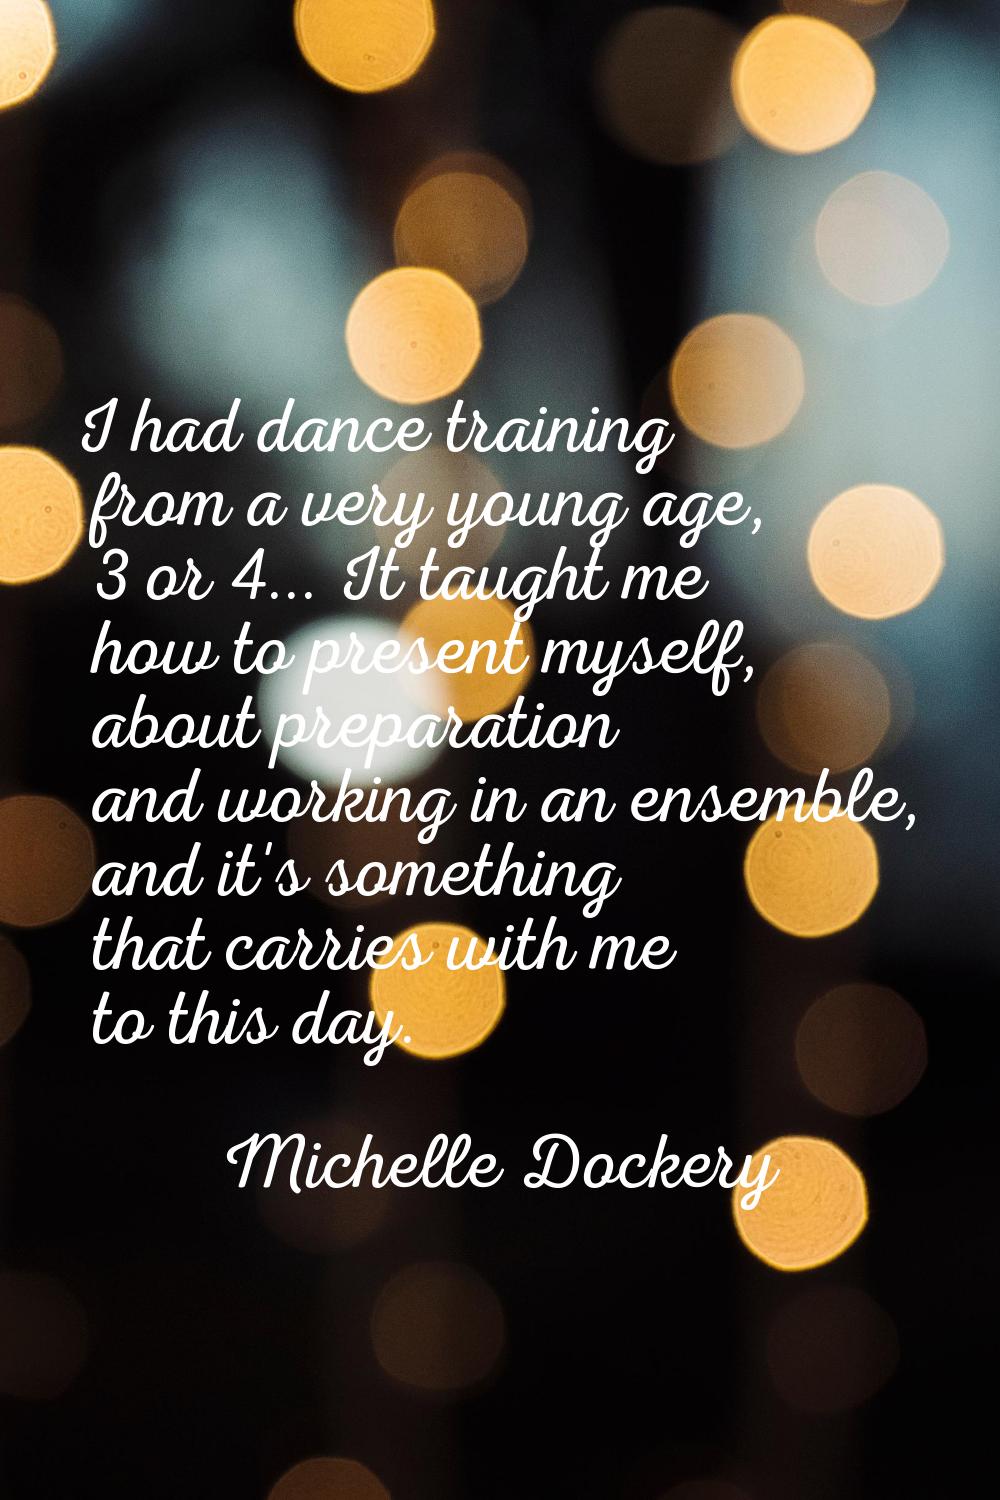 I had dance training from a very young age, 3 or 4... It taught me how to present myself, about pre